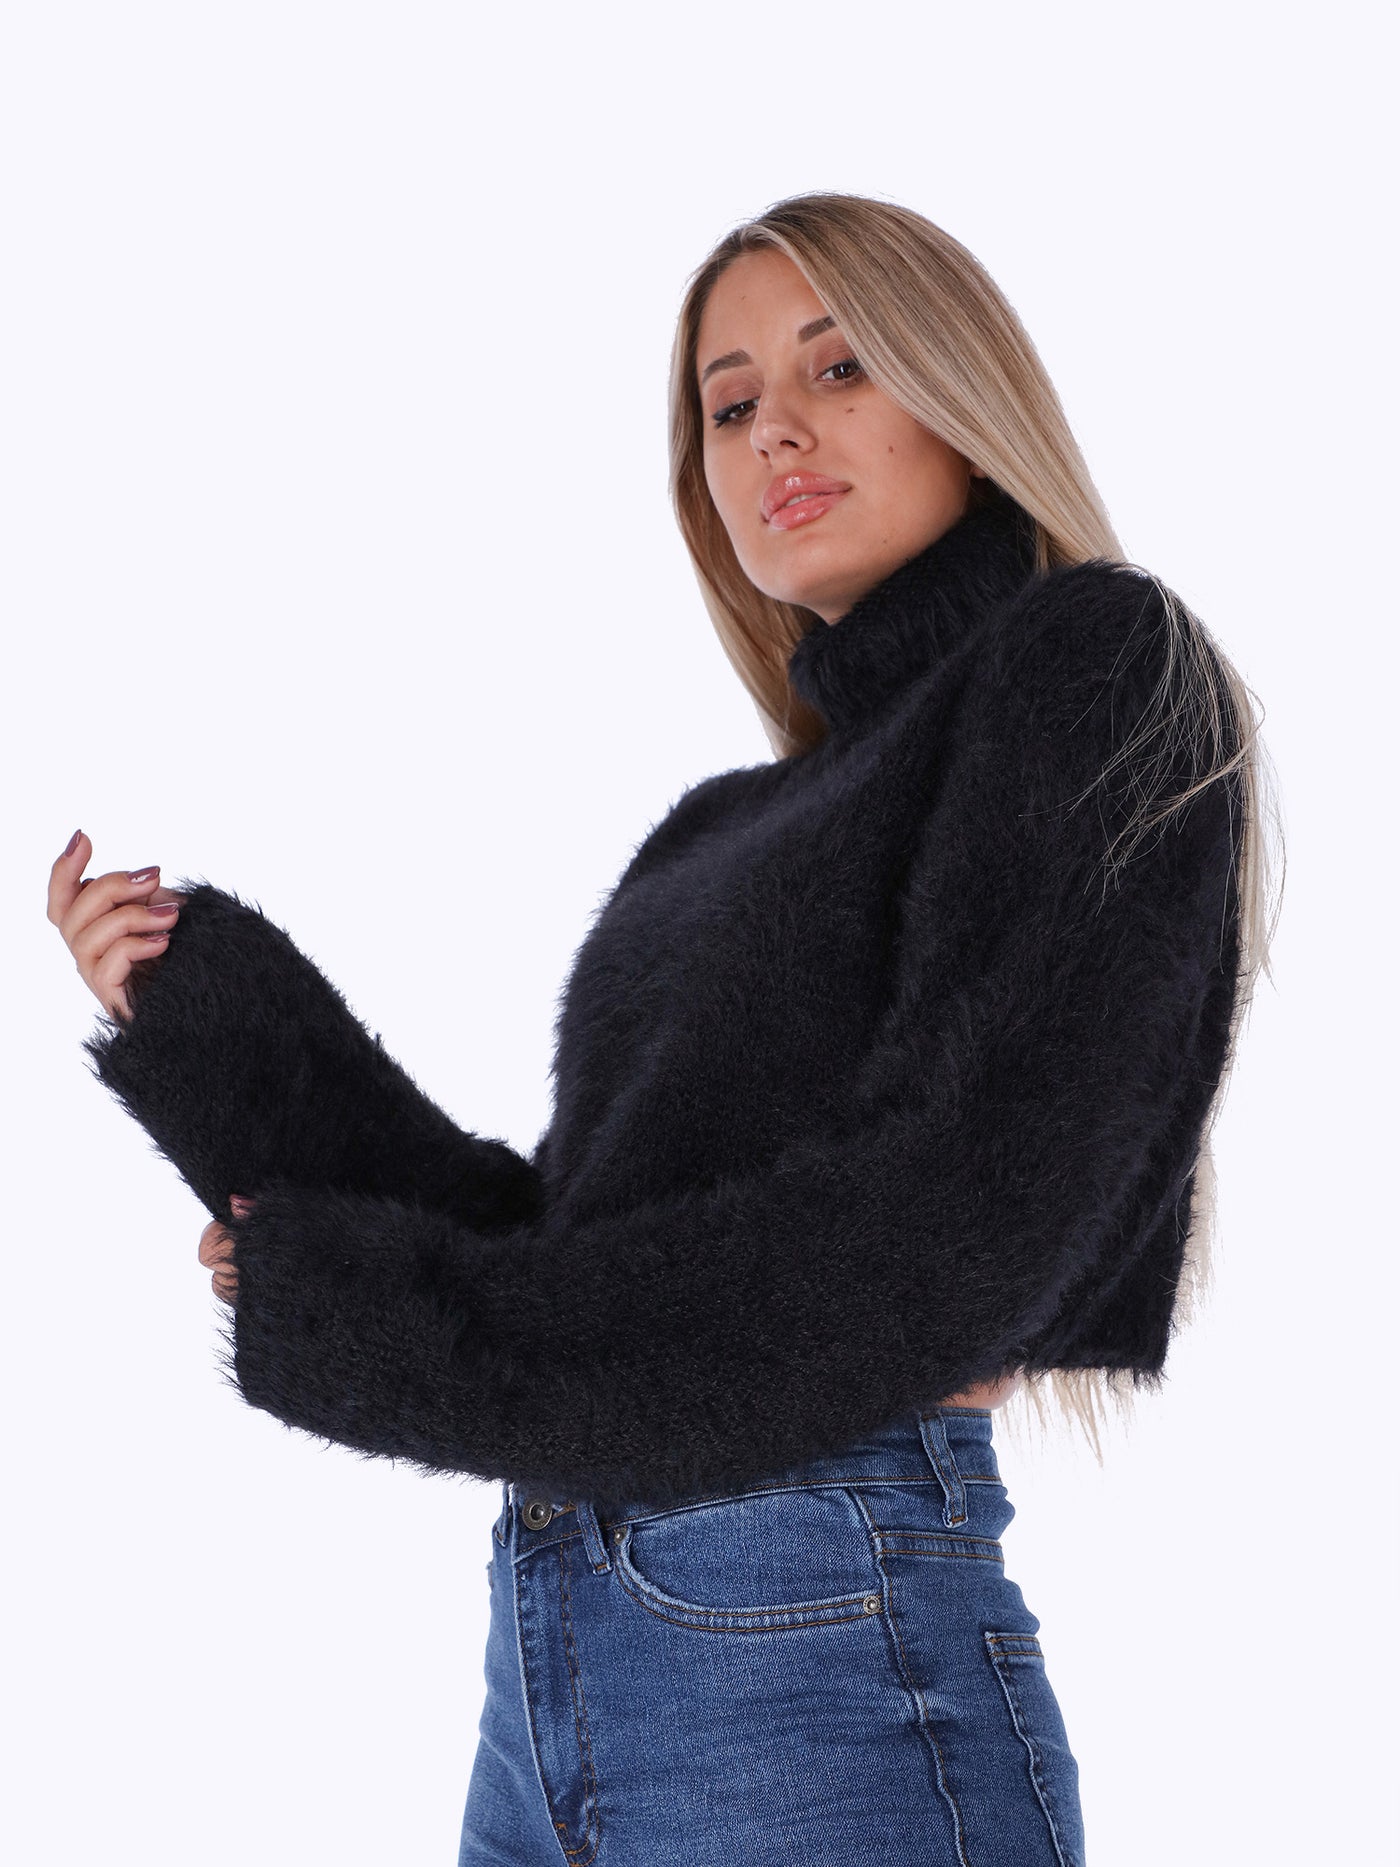 Oversized Pullover - Cropped